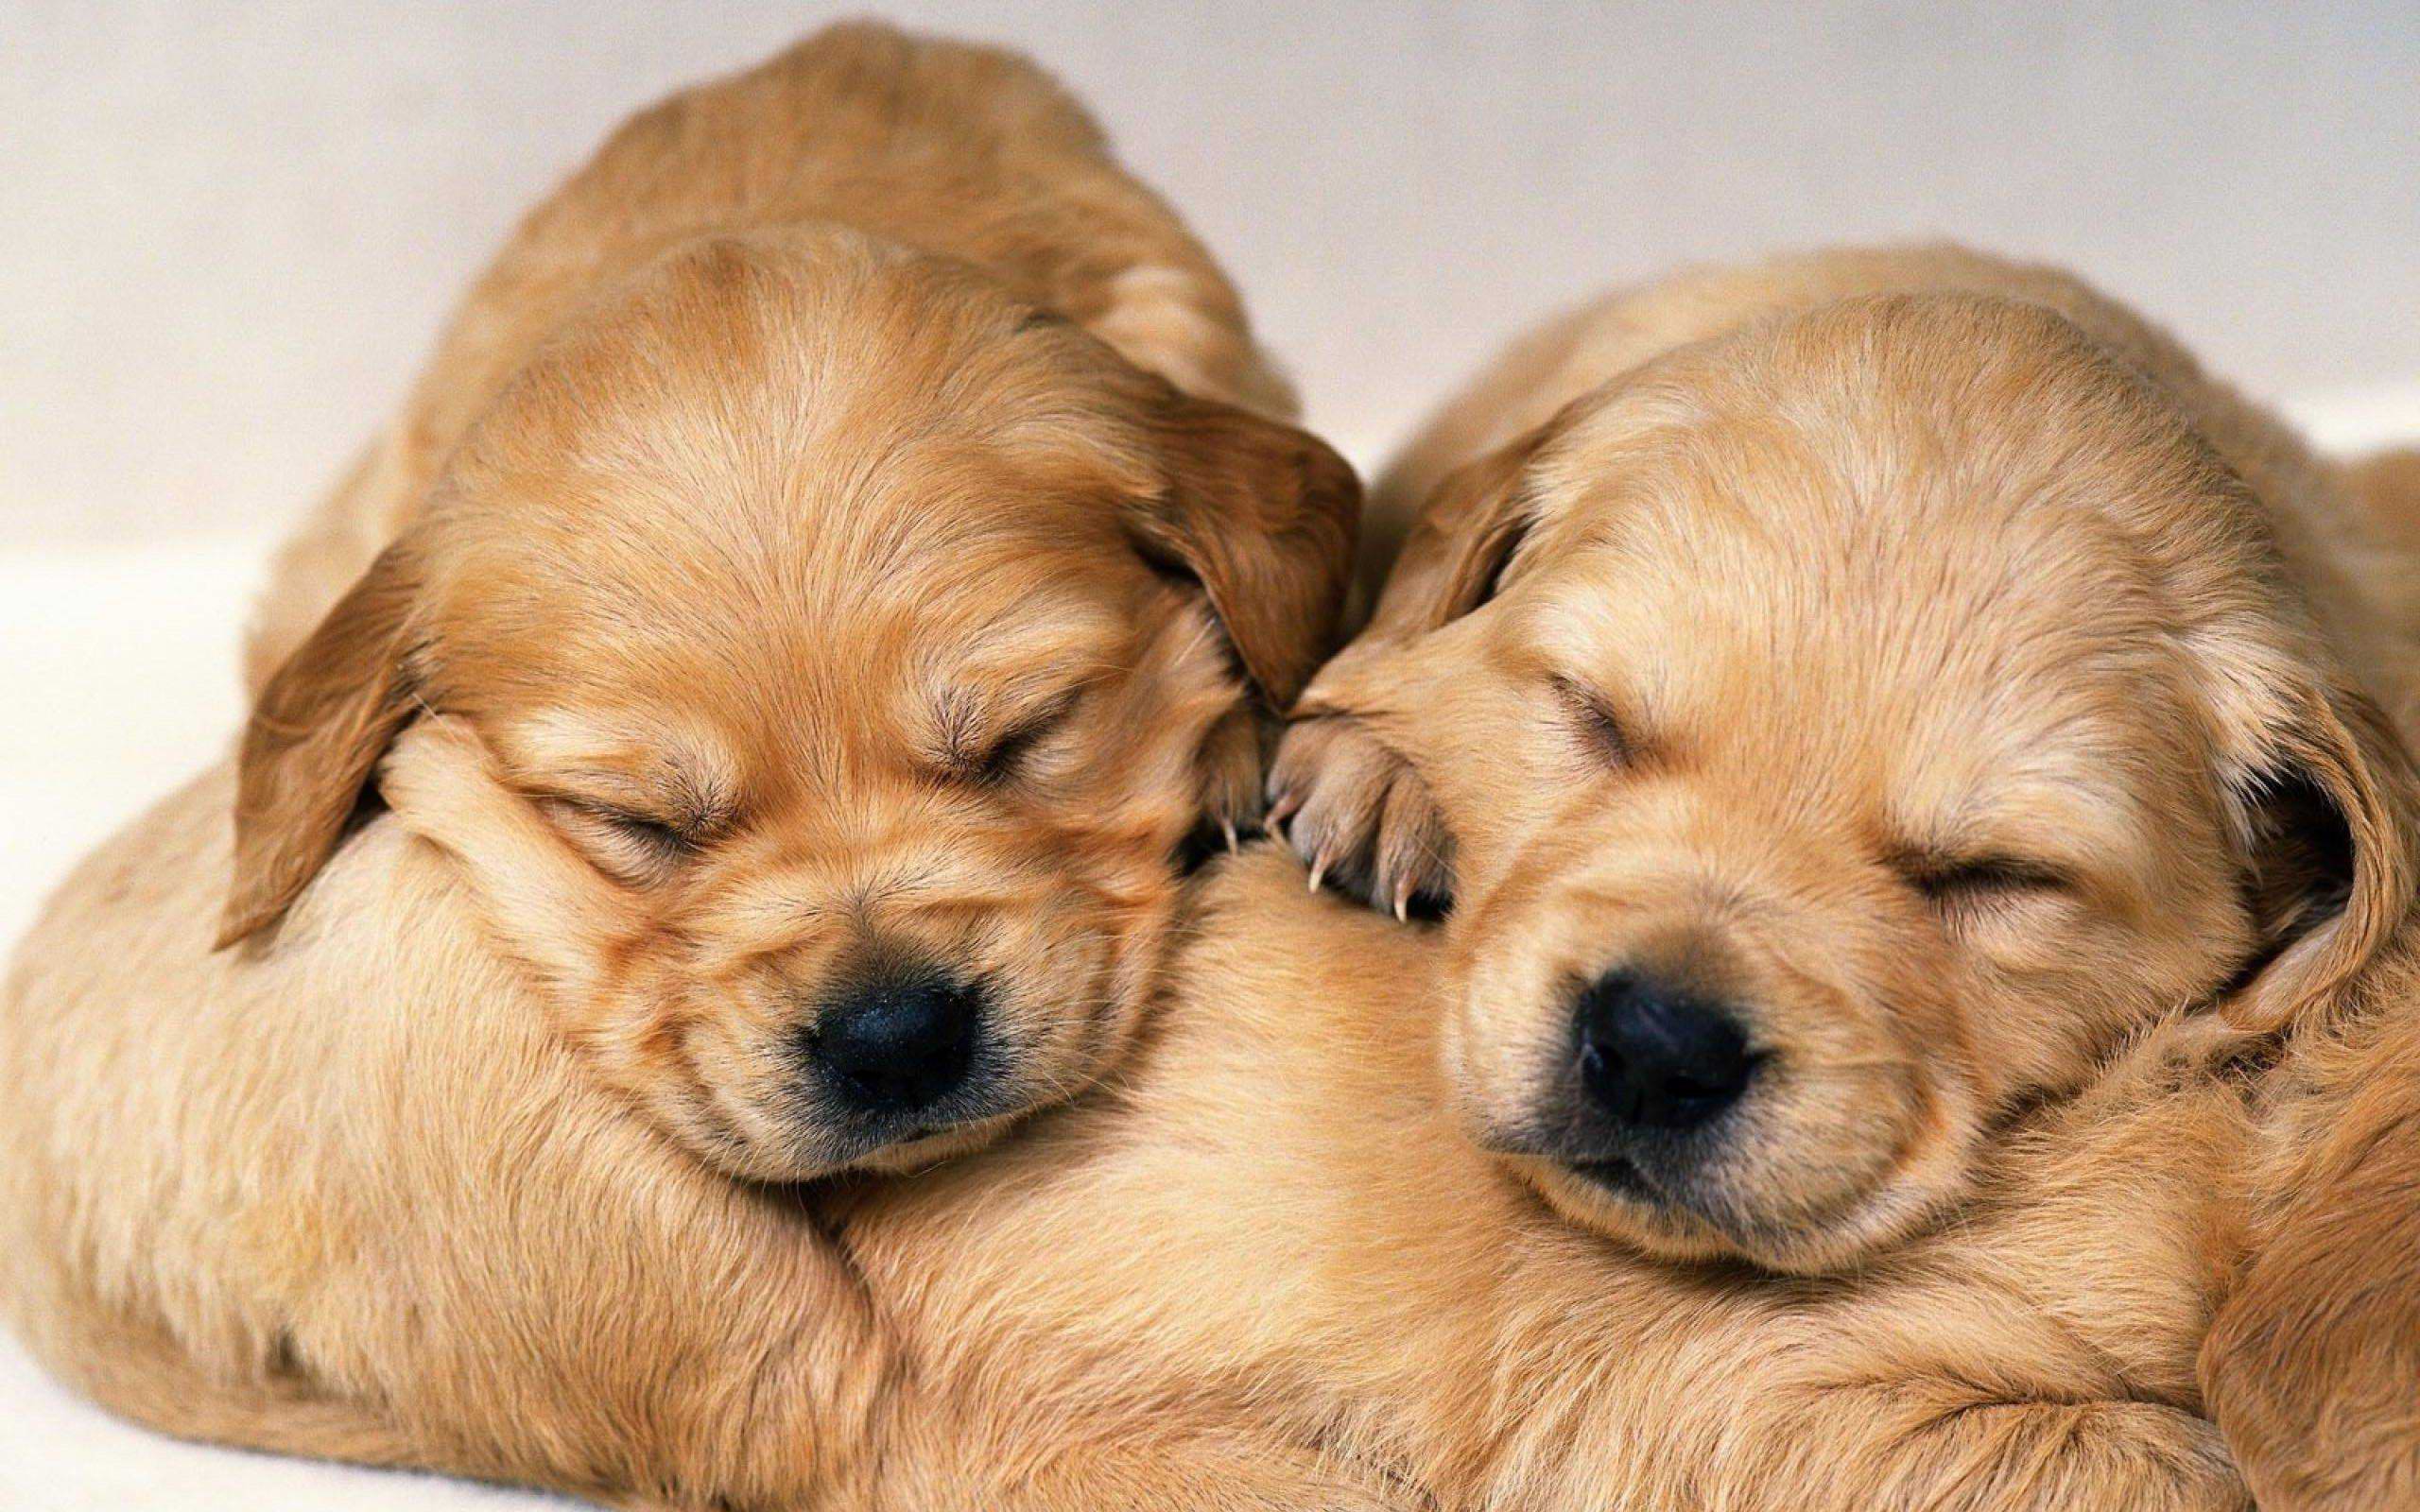 Cute Puppy Backgrounds - Wallpaper Cave